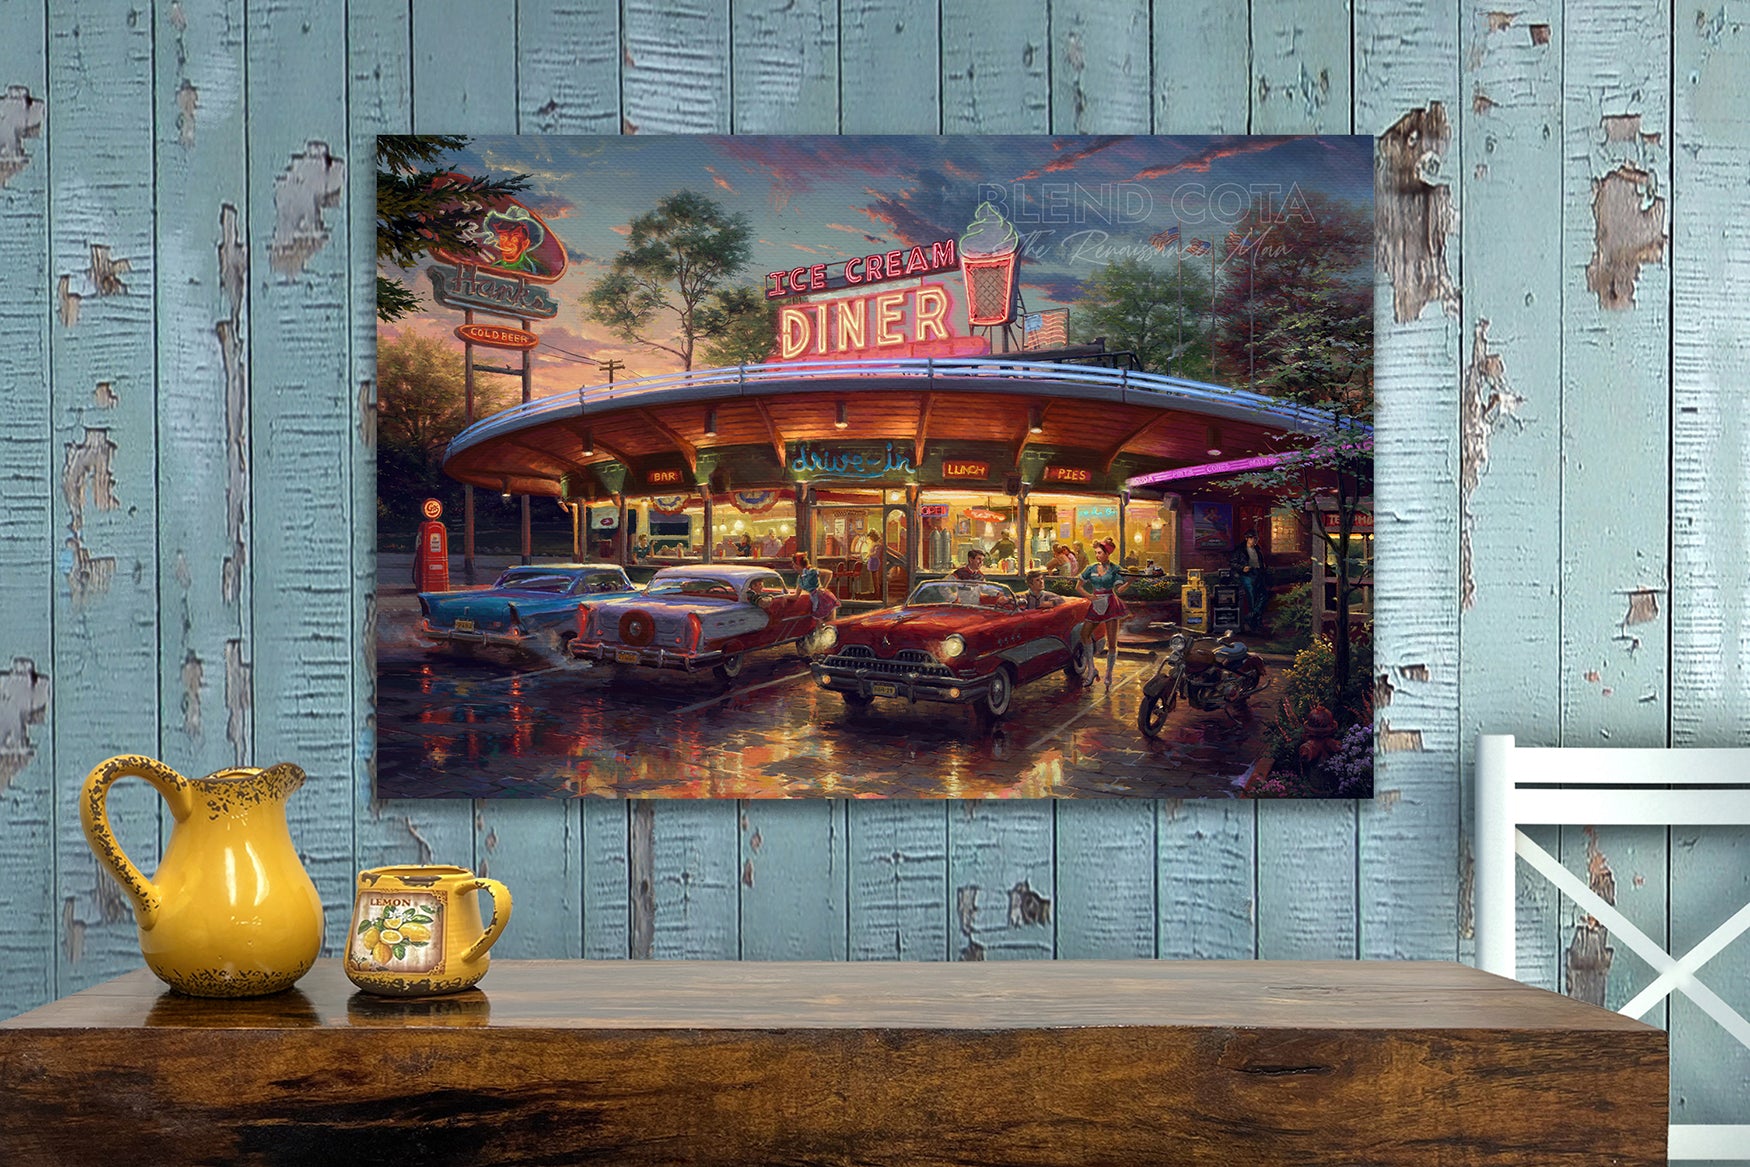 Meet You At The Diner - Blend Cota Limited Edition Art on Metal - Blend Cota Studios 